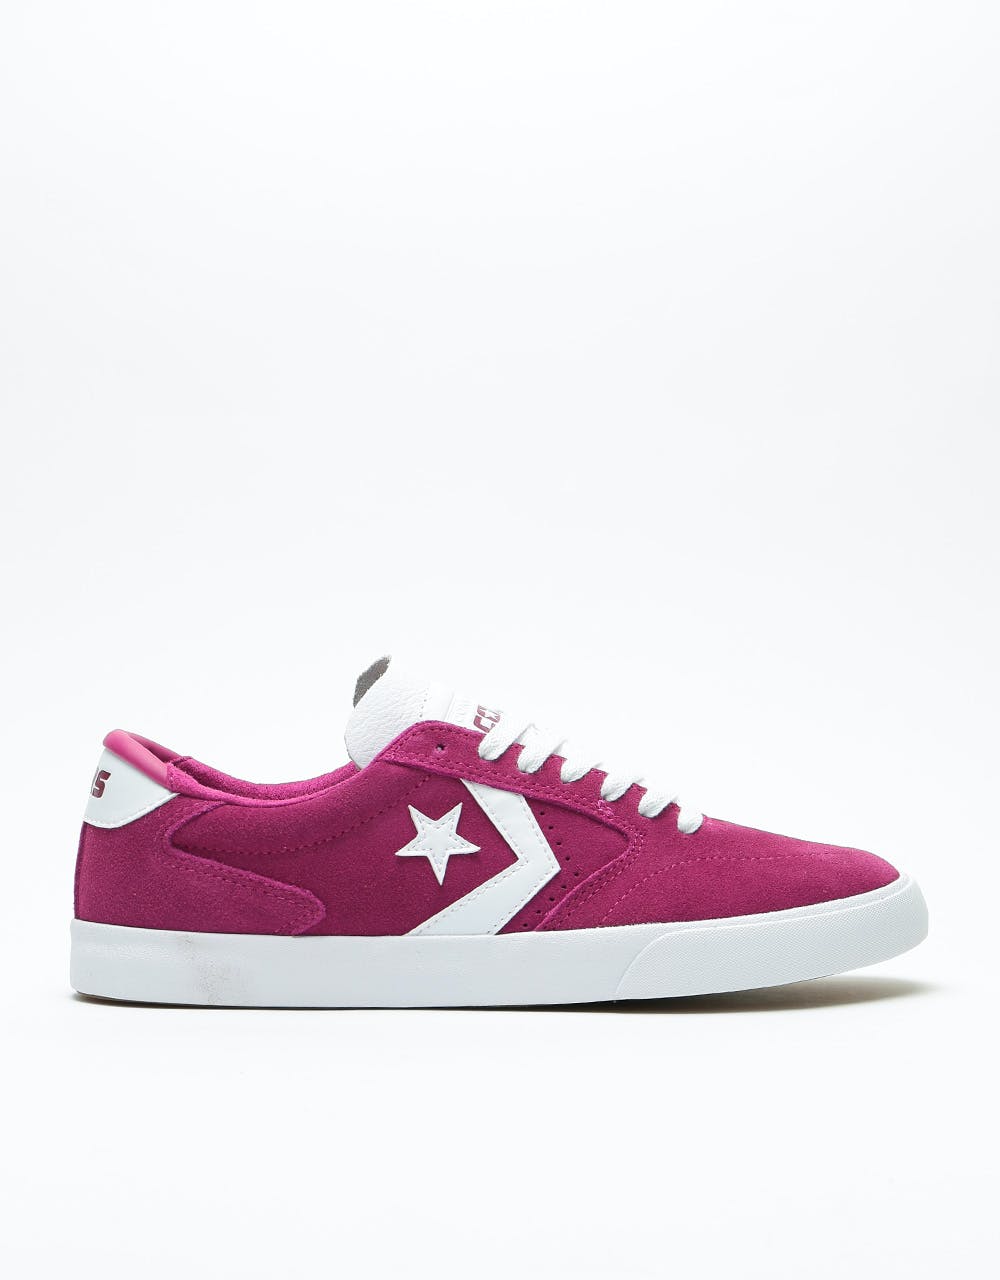 Converse Checkpoint Pro Ox Suede Skate Shoes - Rose Maroon/White/White